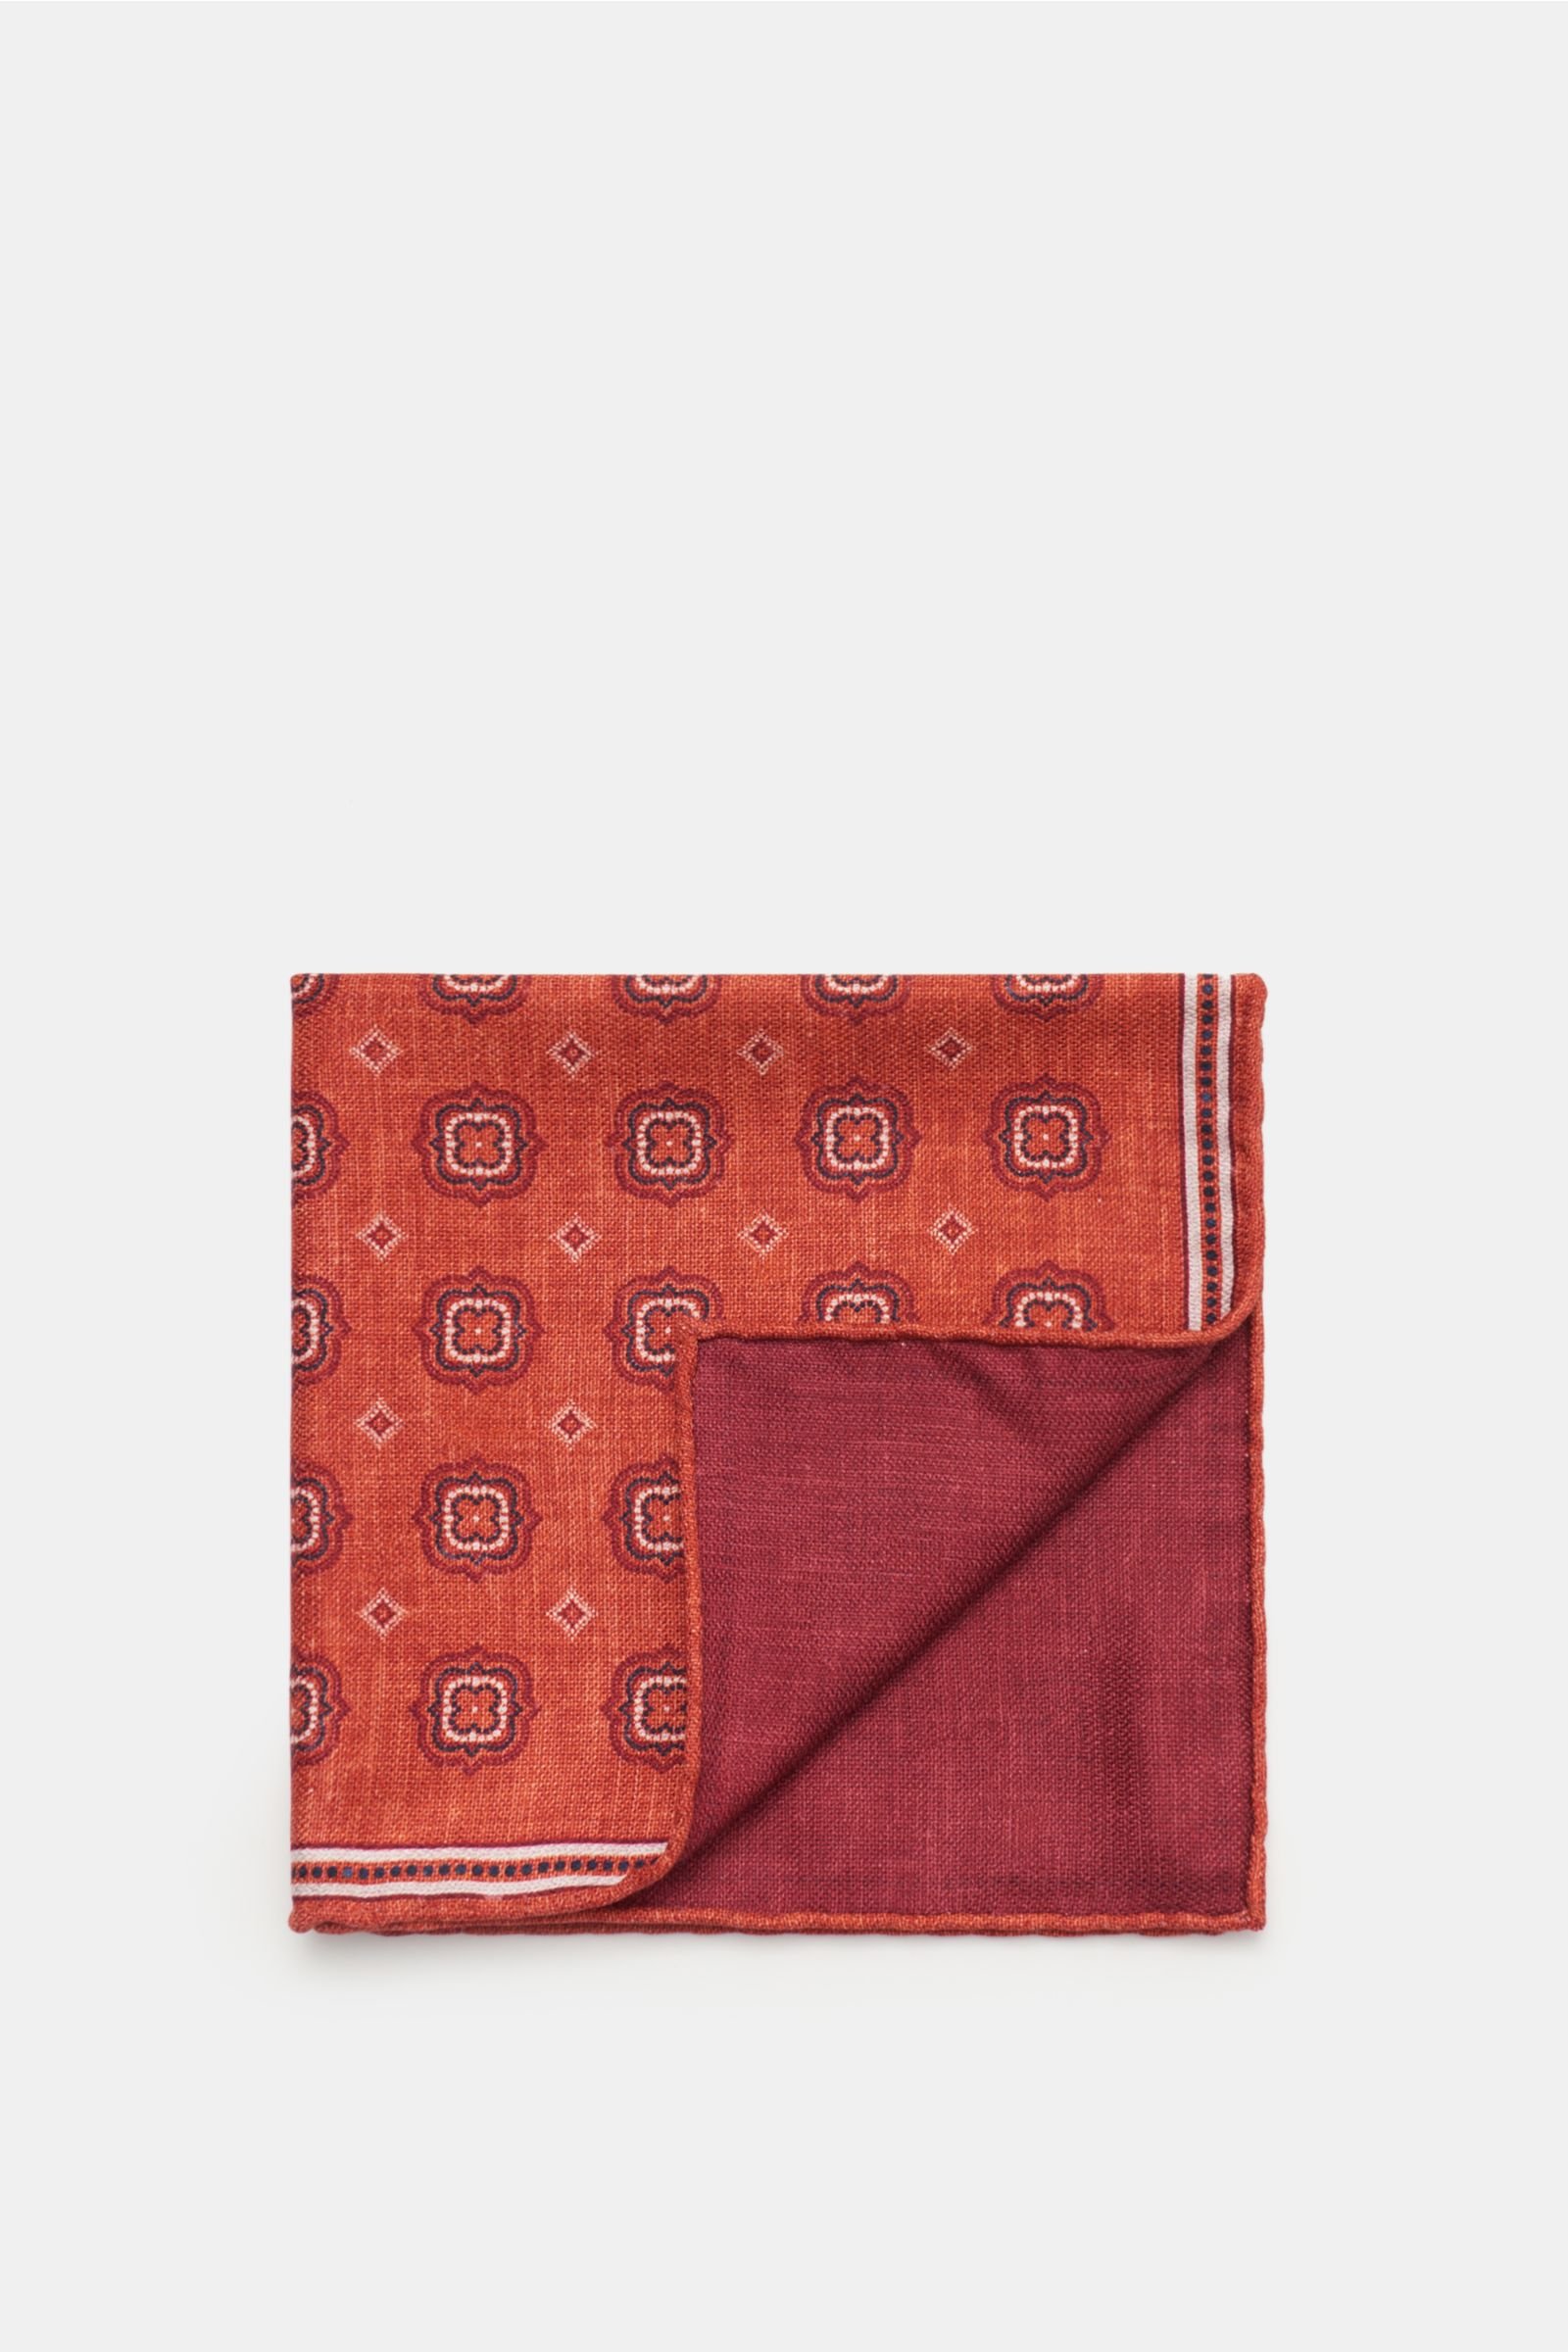 Pocket square rust-red patterned